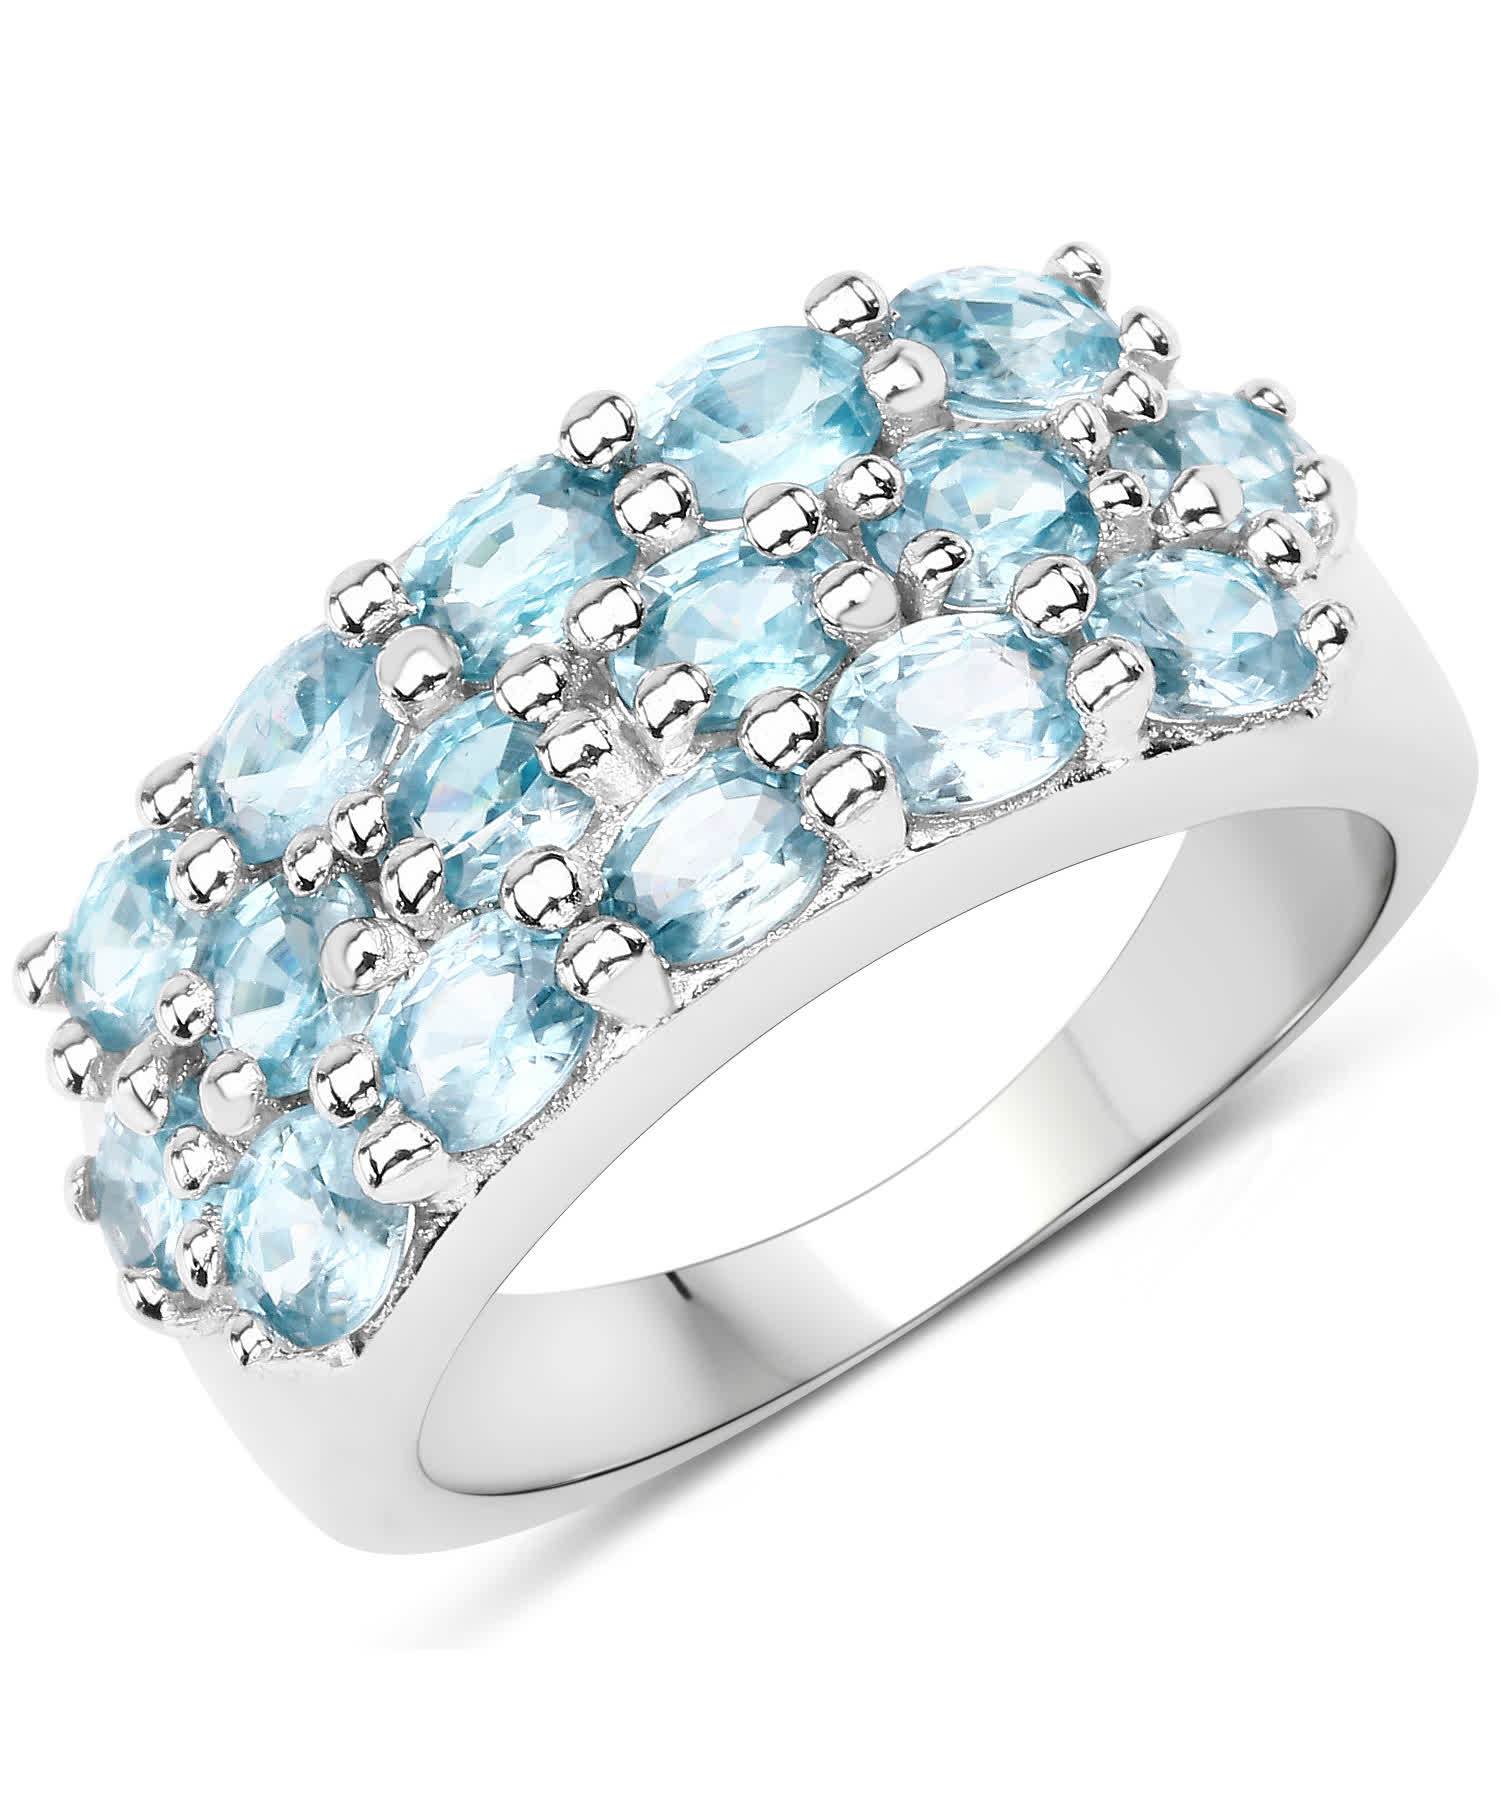 4.00ctw Natural Blue Zircon Rhodium Plated 925 Sterling Silver Right Hand Ring View 1